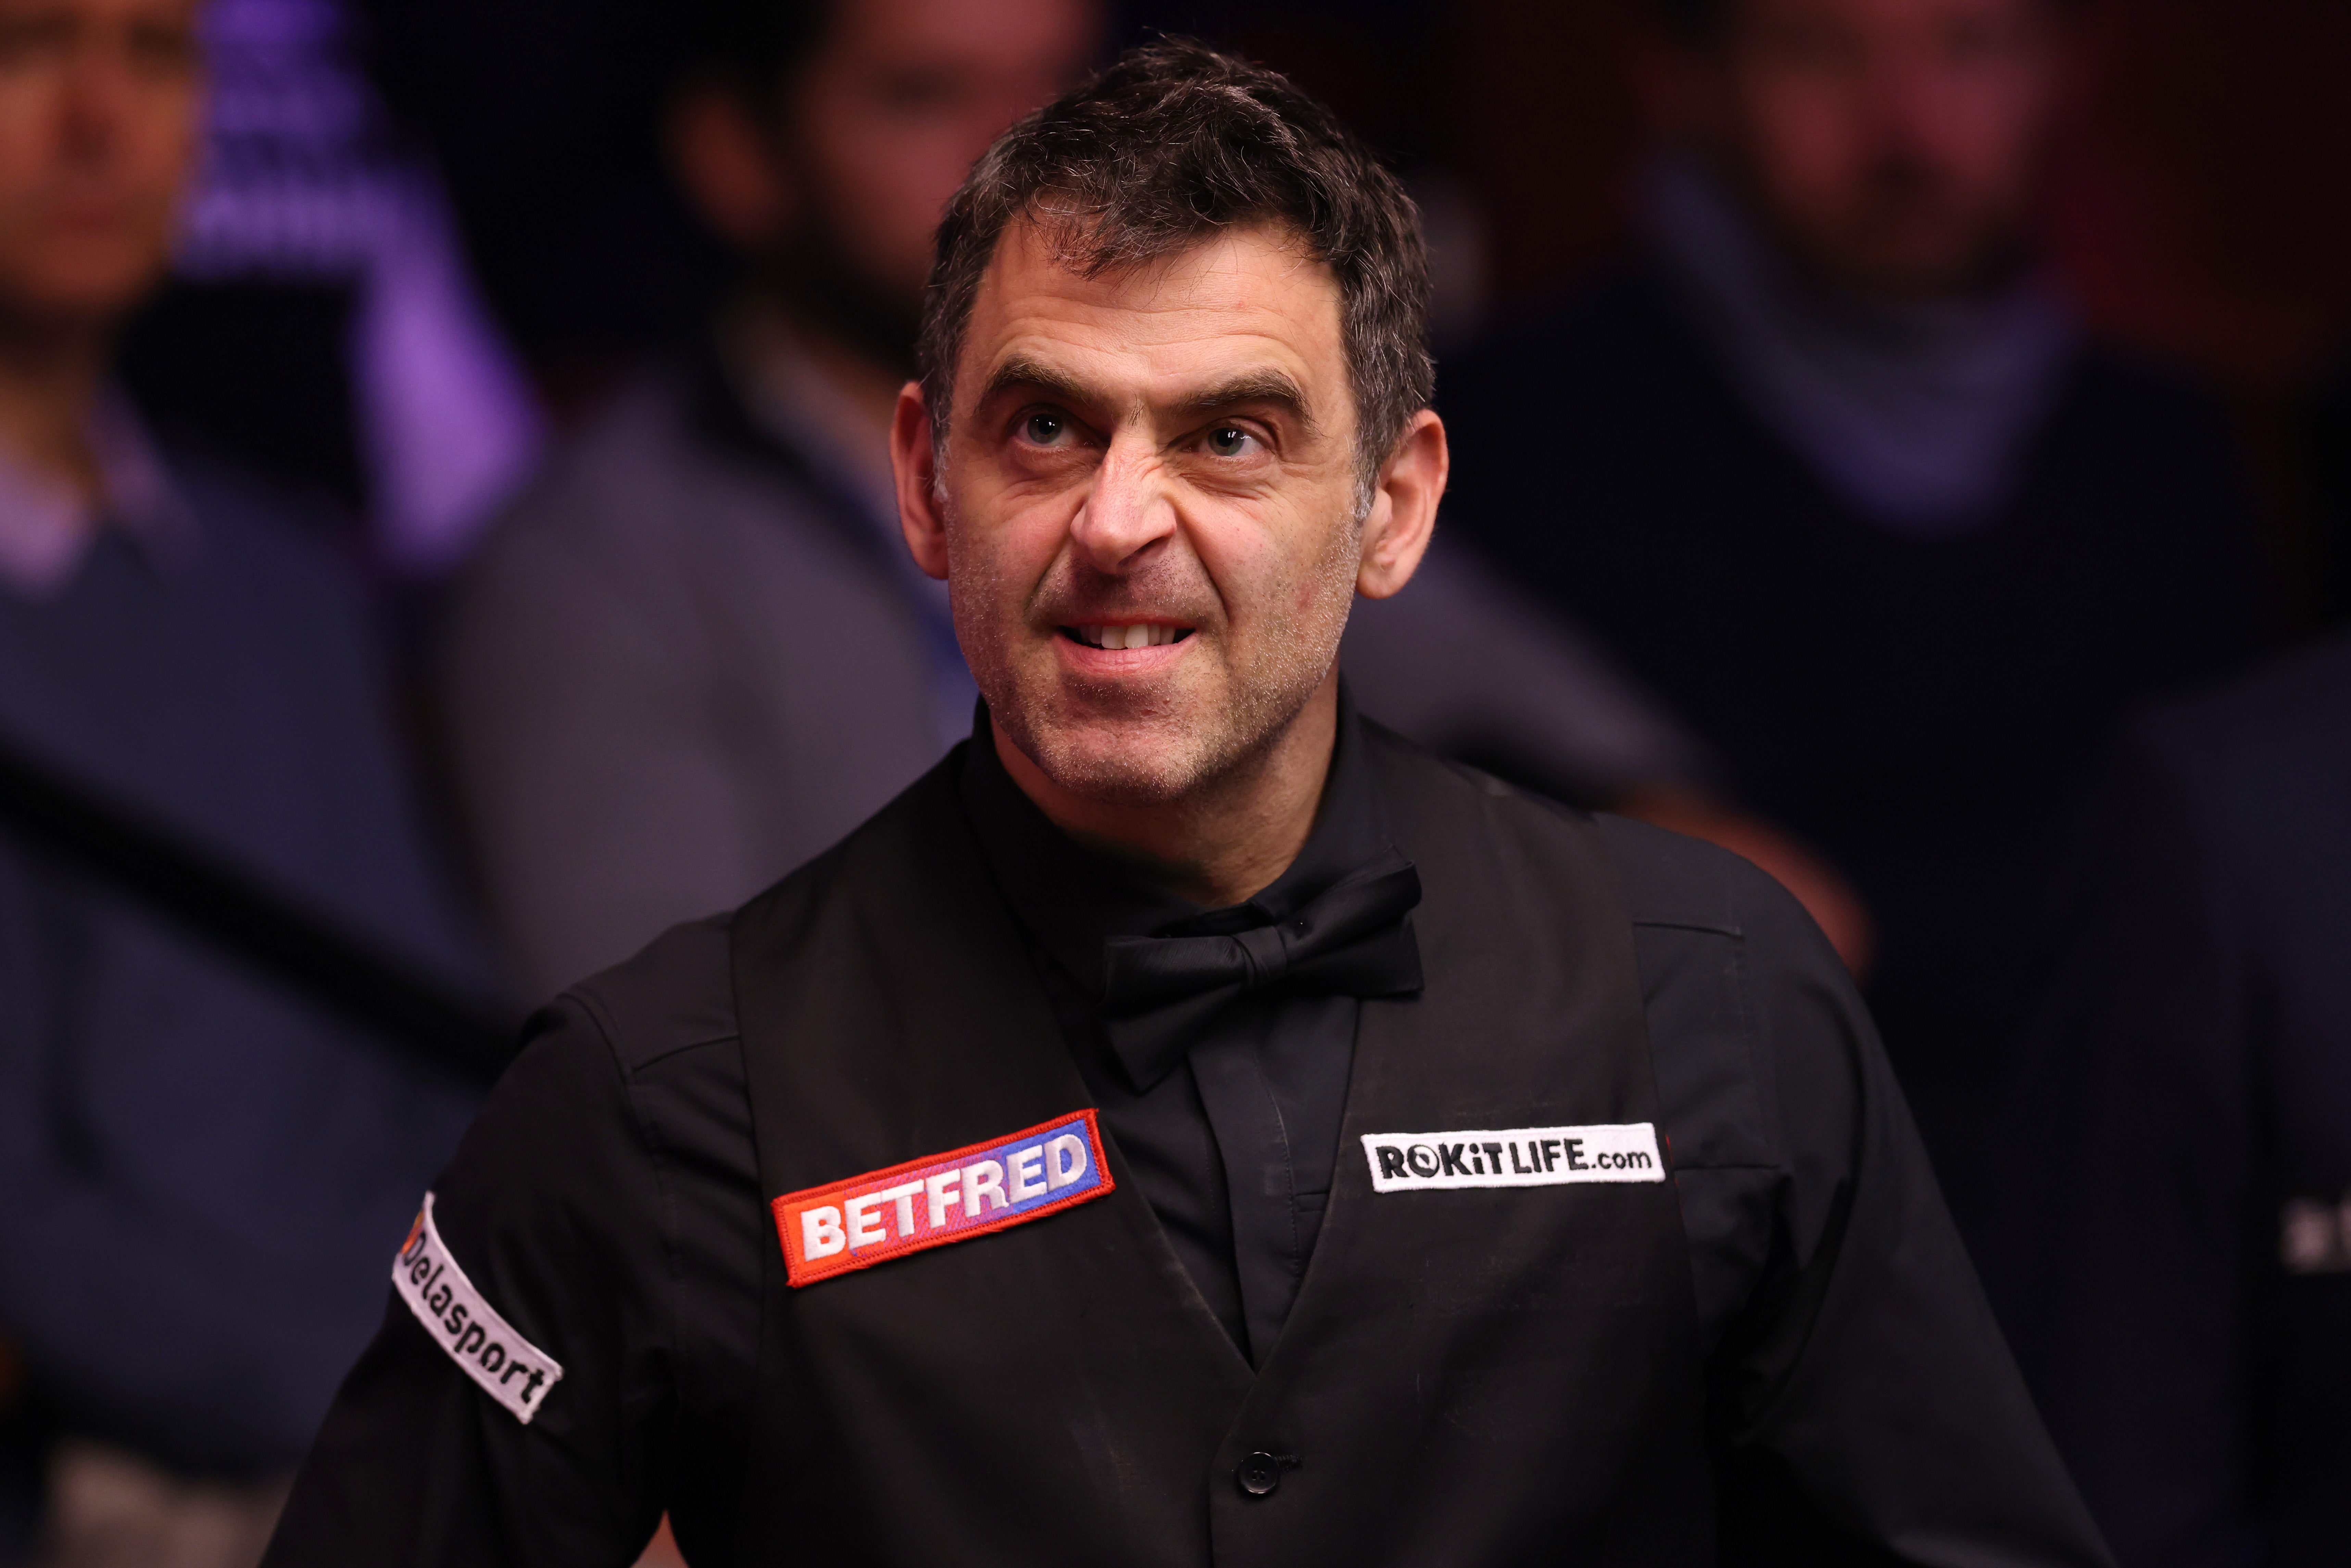 Stephen Hendry claims Ronnie O’Sullivan has taken the game to a ‘new level’